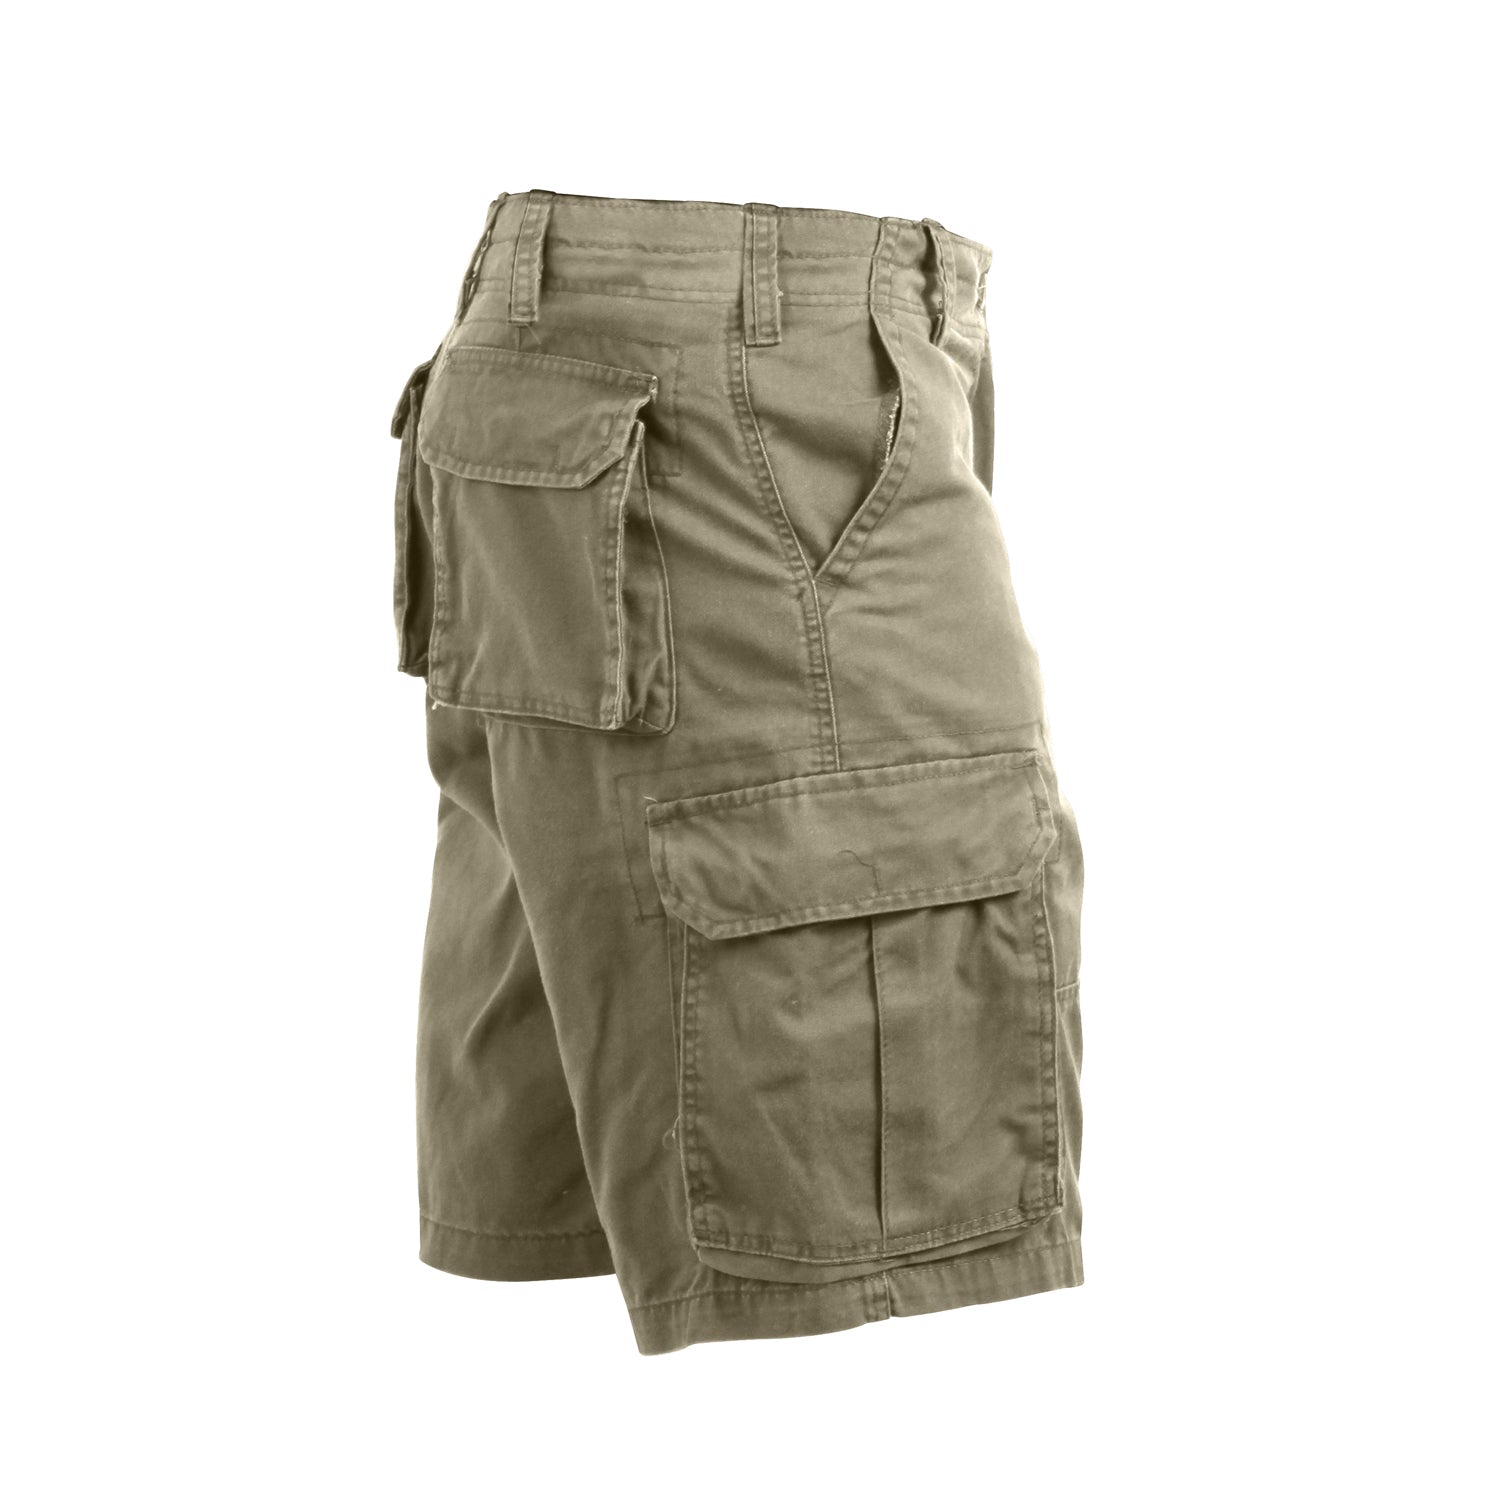 Rothco Vintage Paratrooper Cargo Shorts Olive Drab (2170)